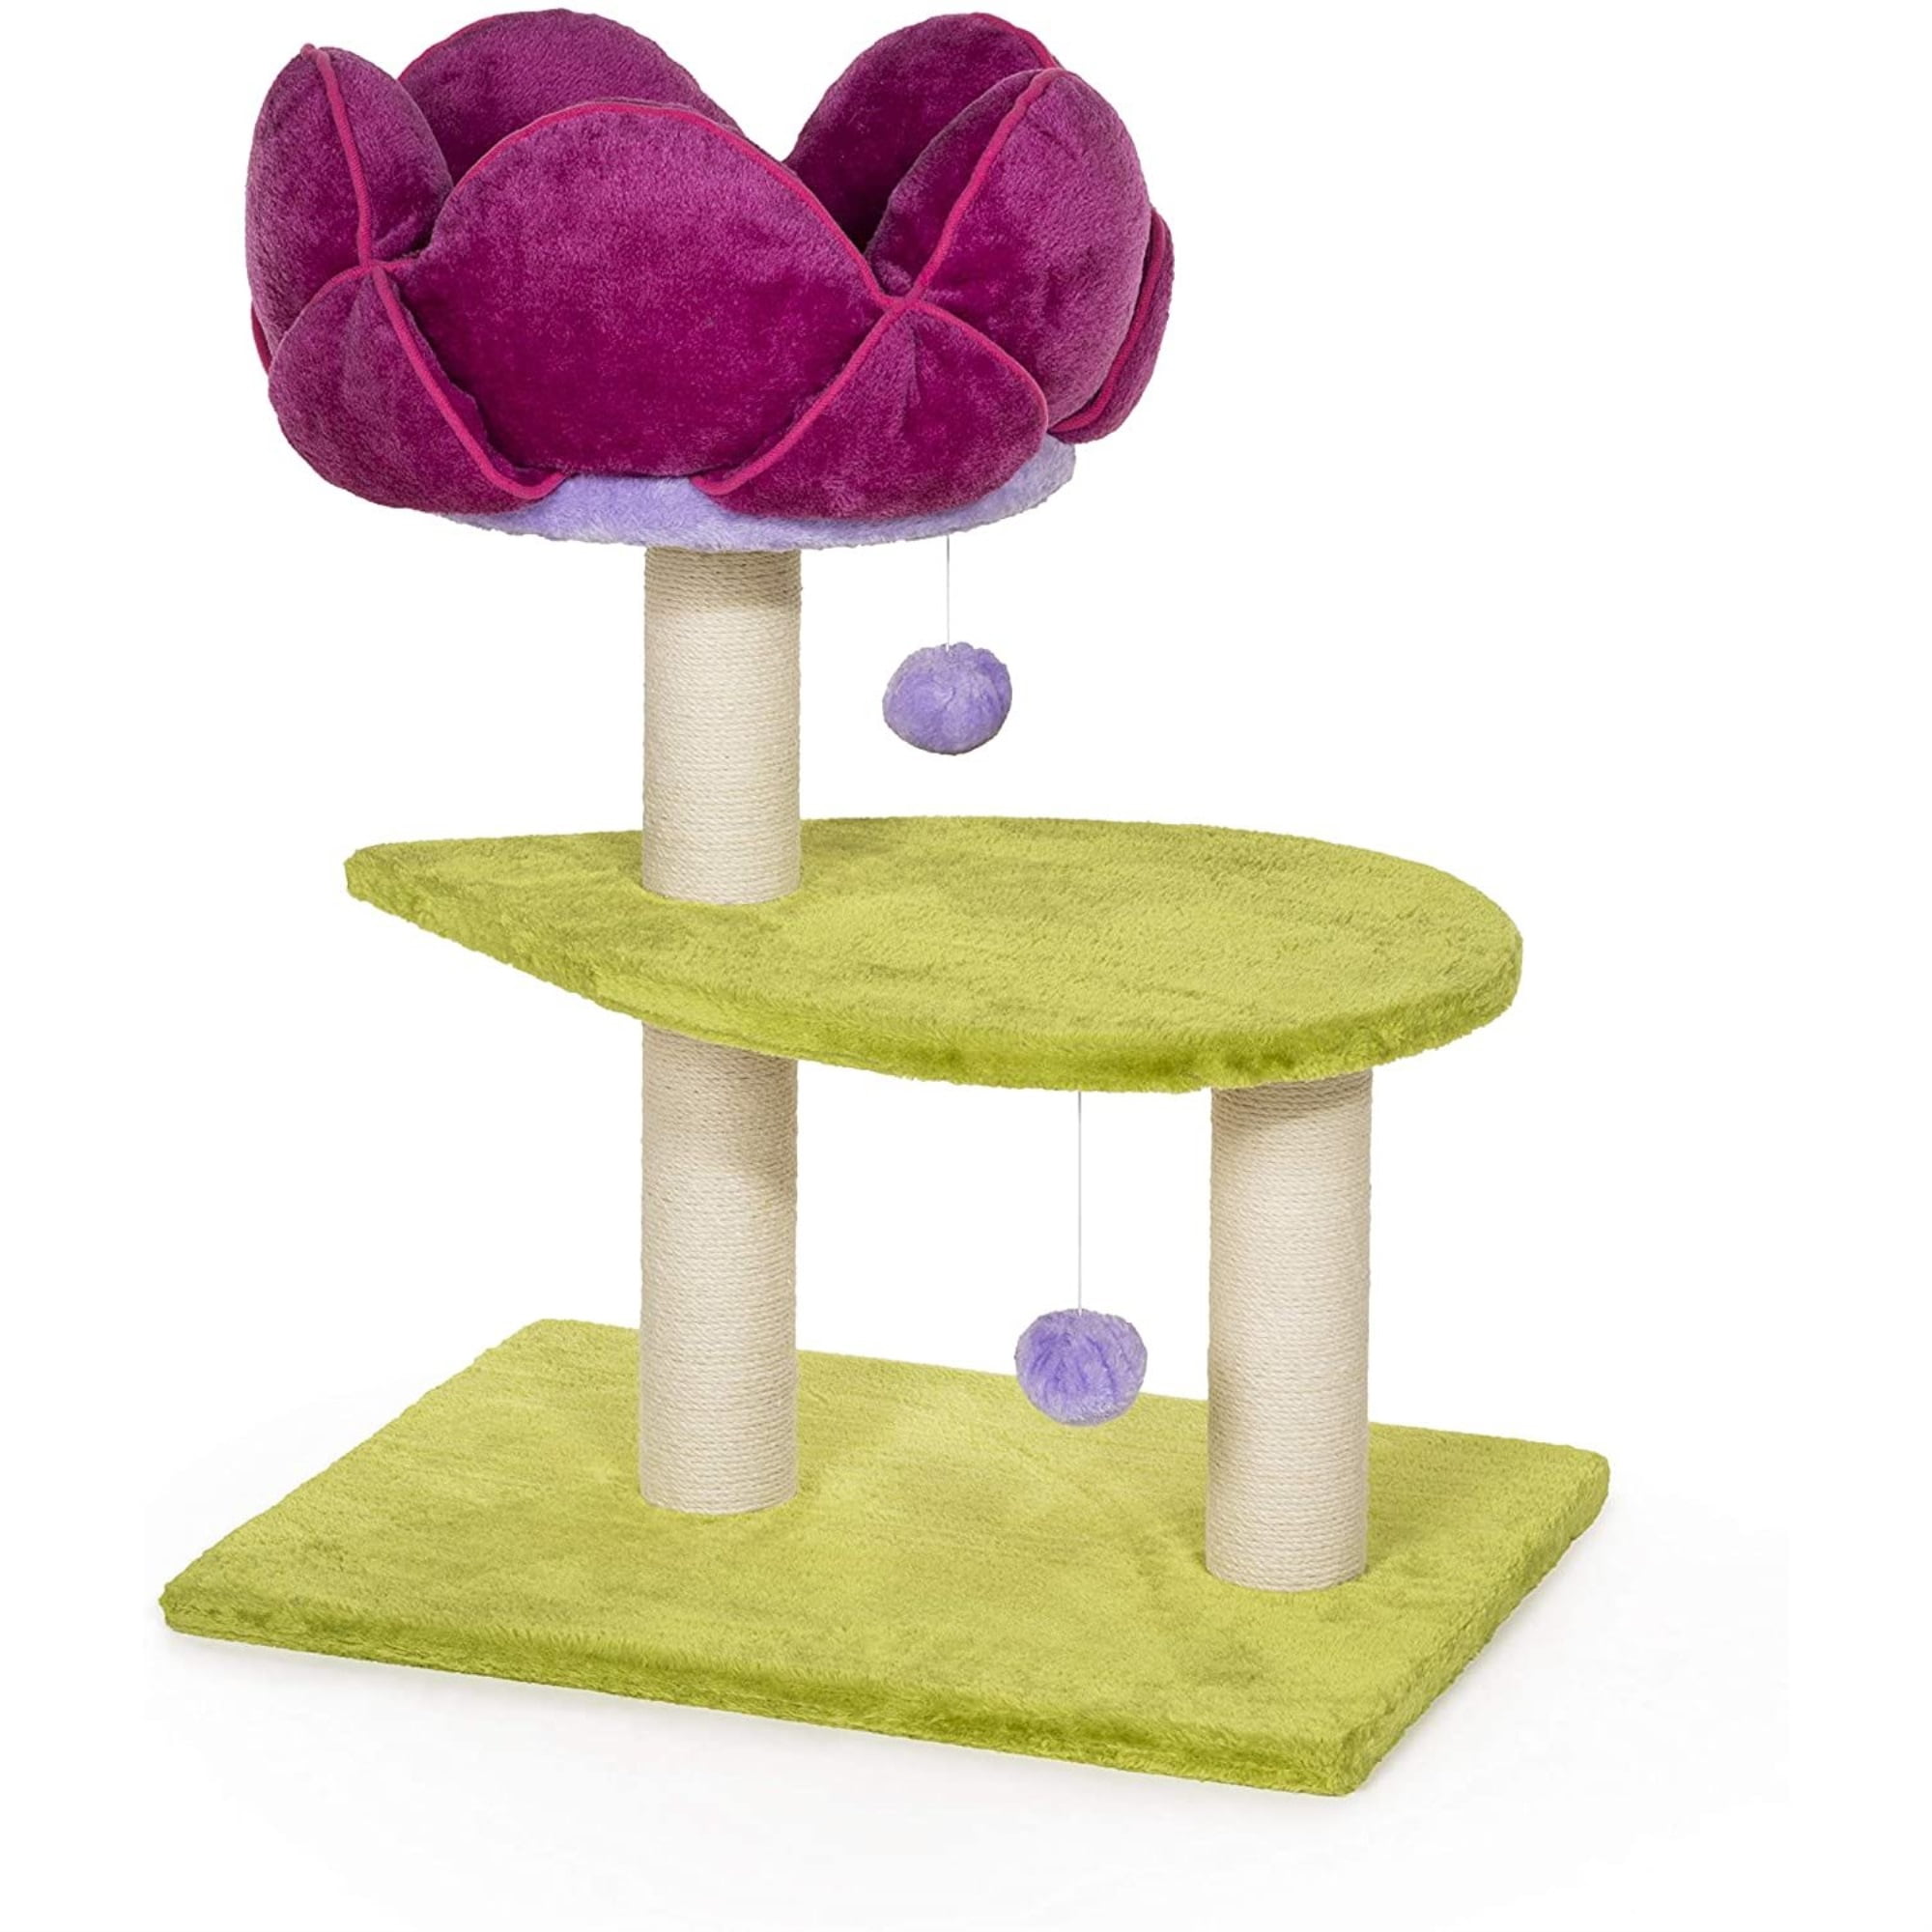 Prevue Pet Products PP-7320 Flower Power Cat Scratching Post